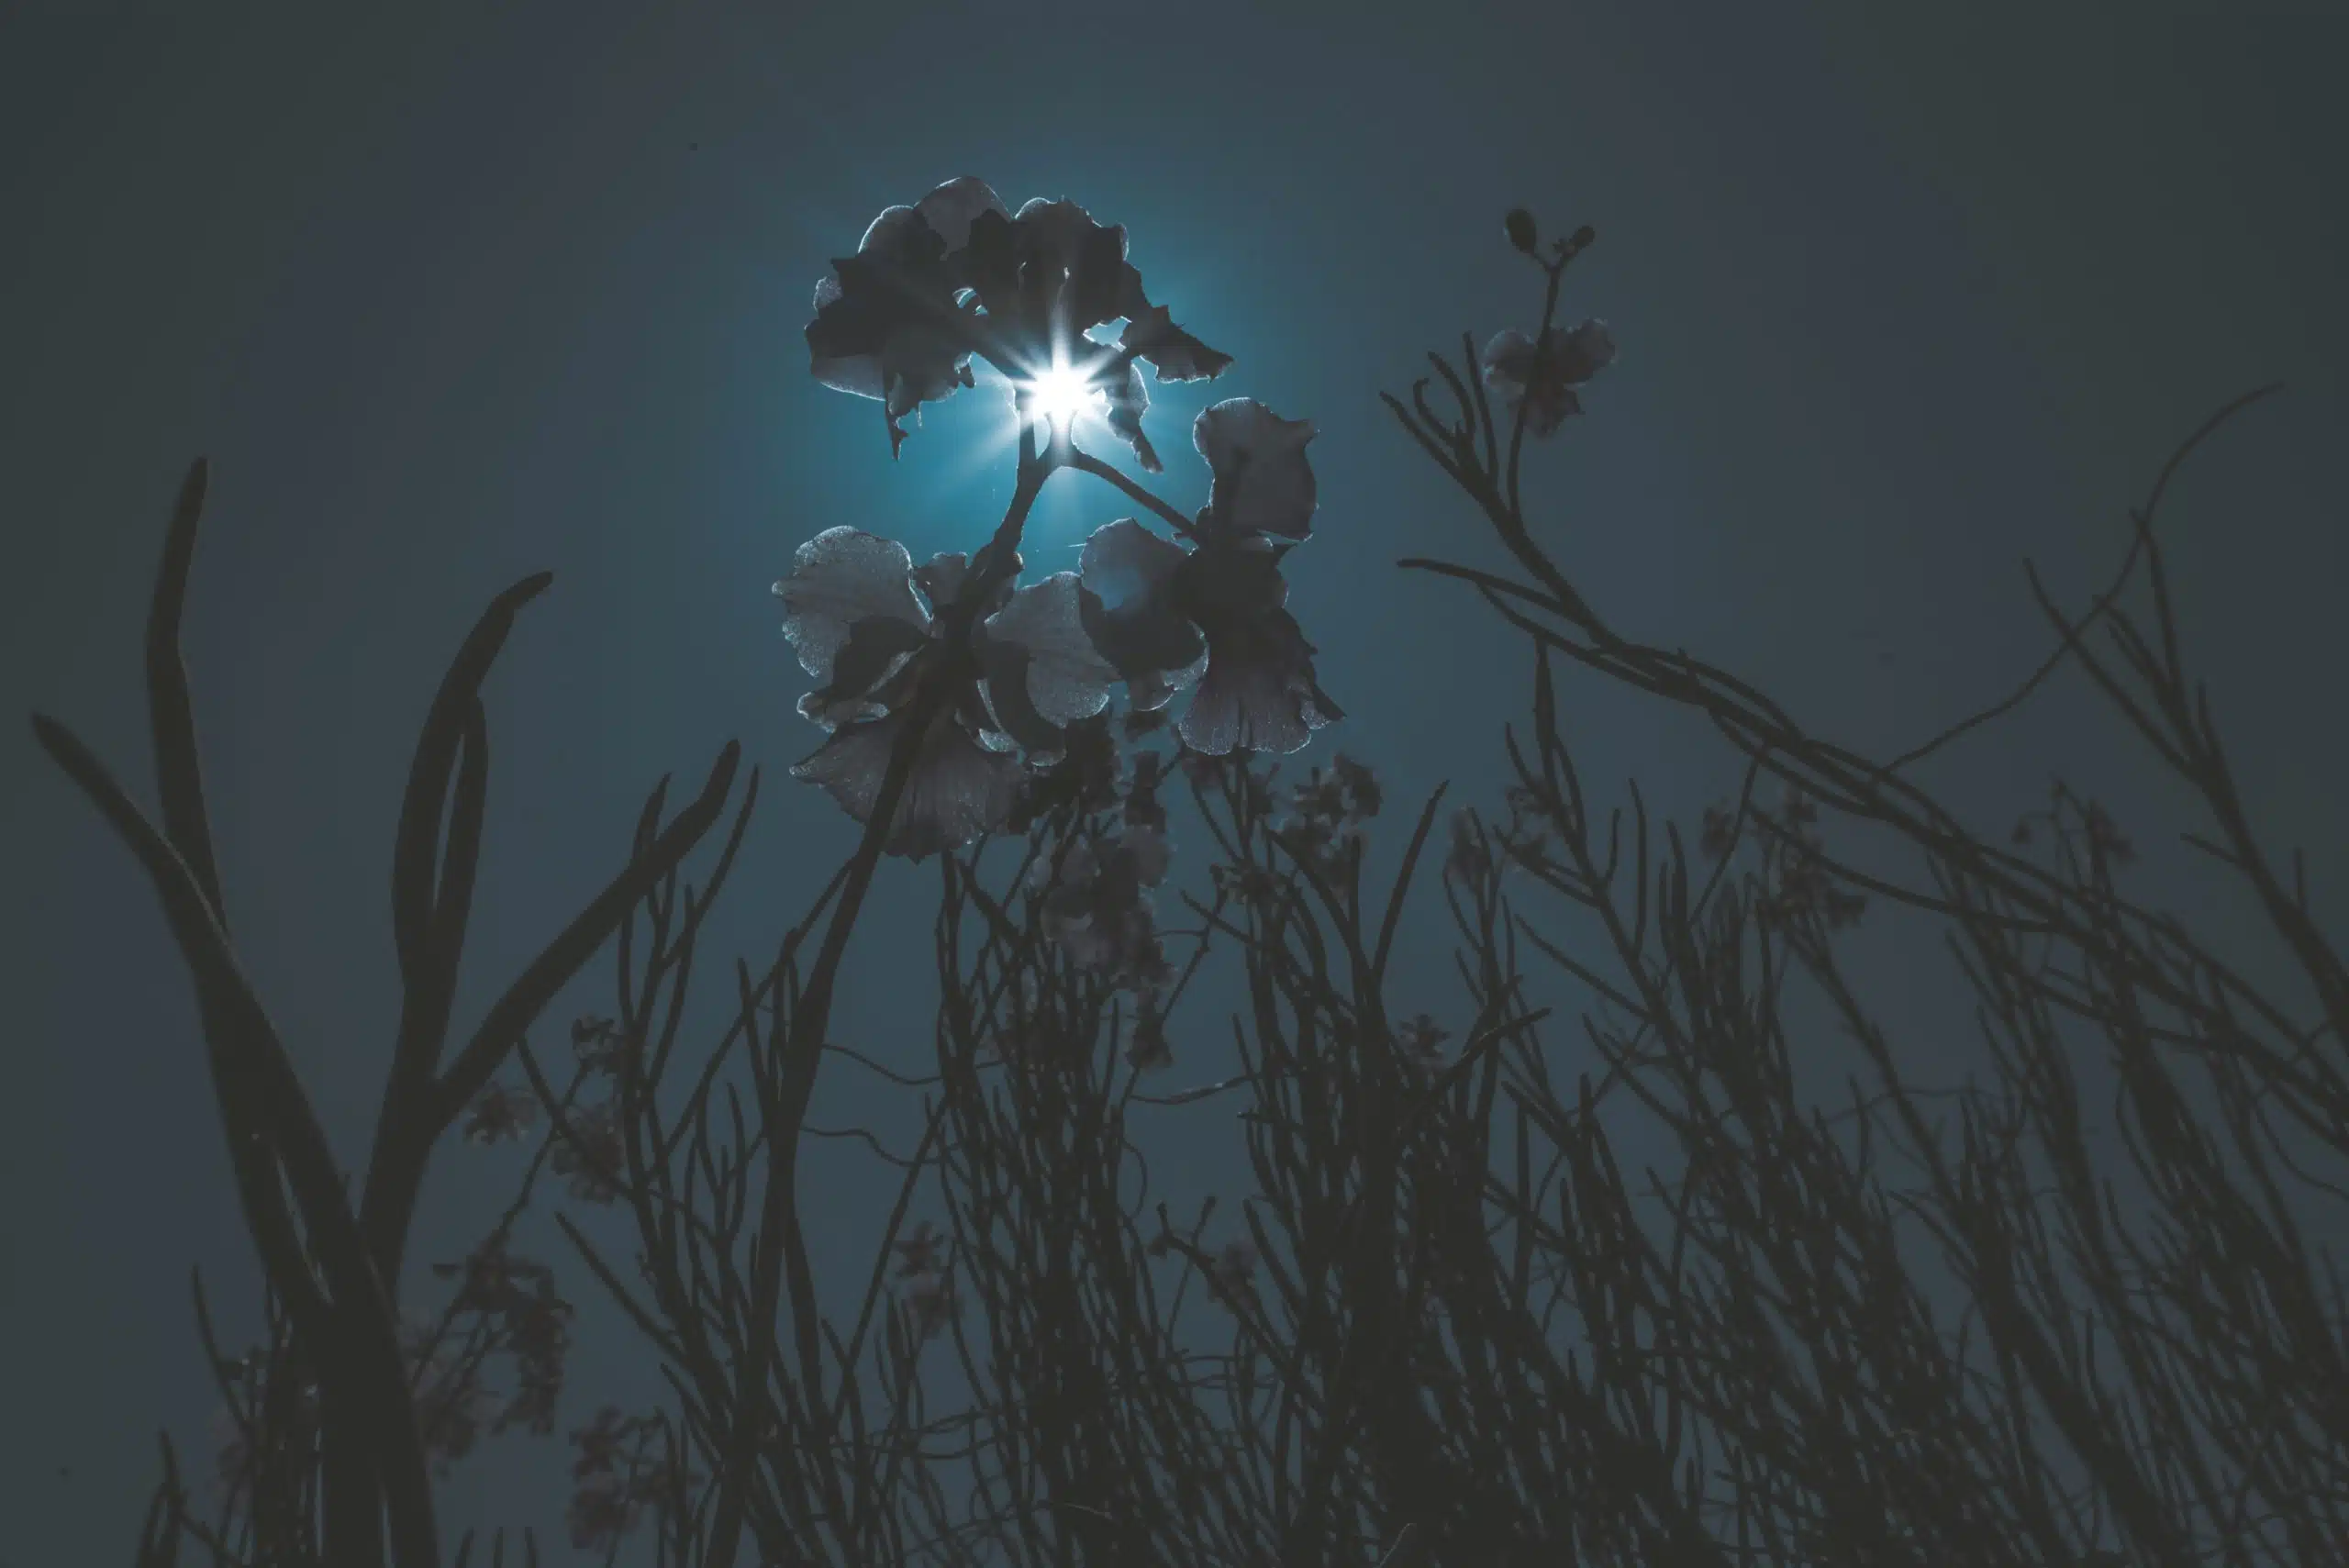 bright moonlight shines through the flowers below